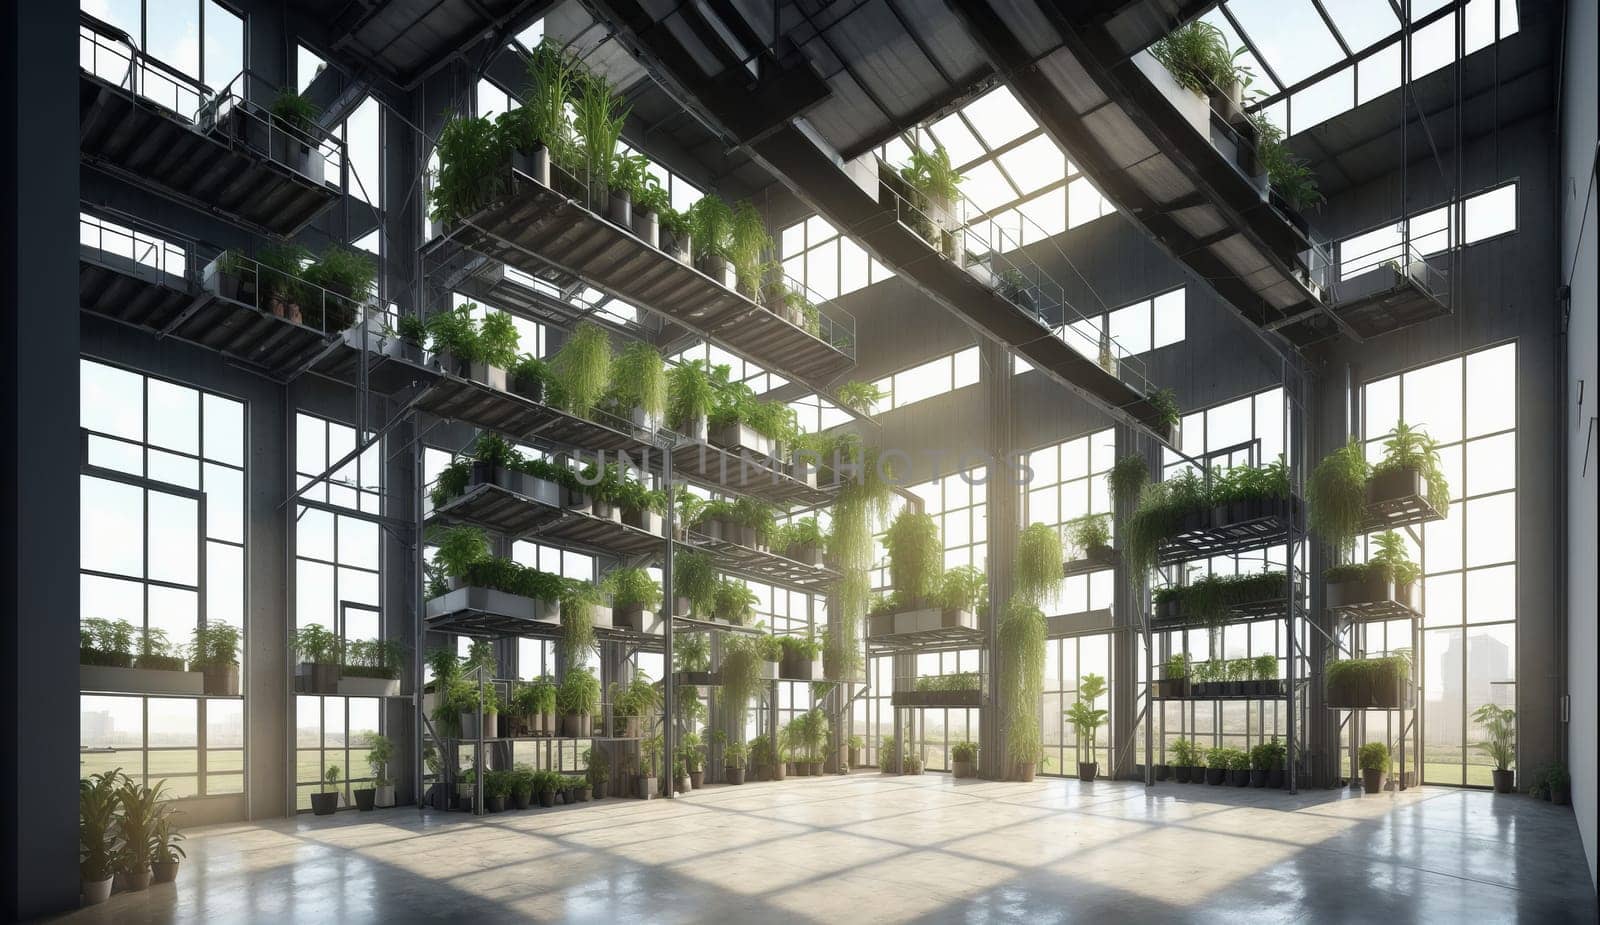 An expansive building with a spacious interior filled with natural light from numerous windows and plants flourishing on the ceiling